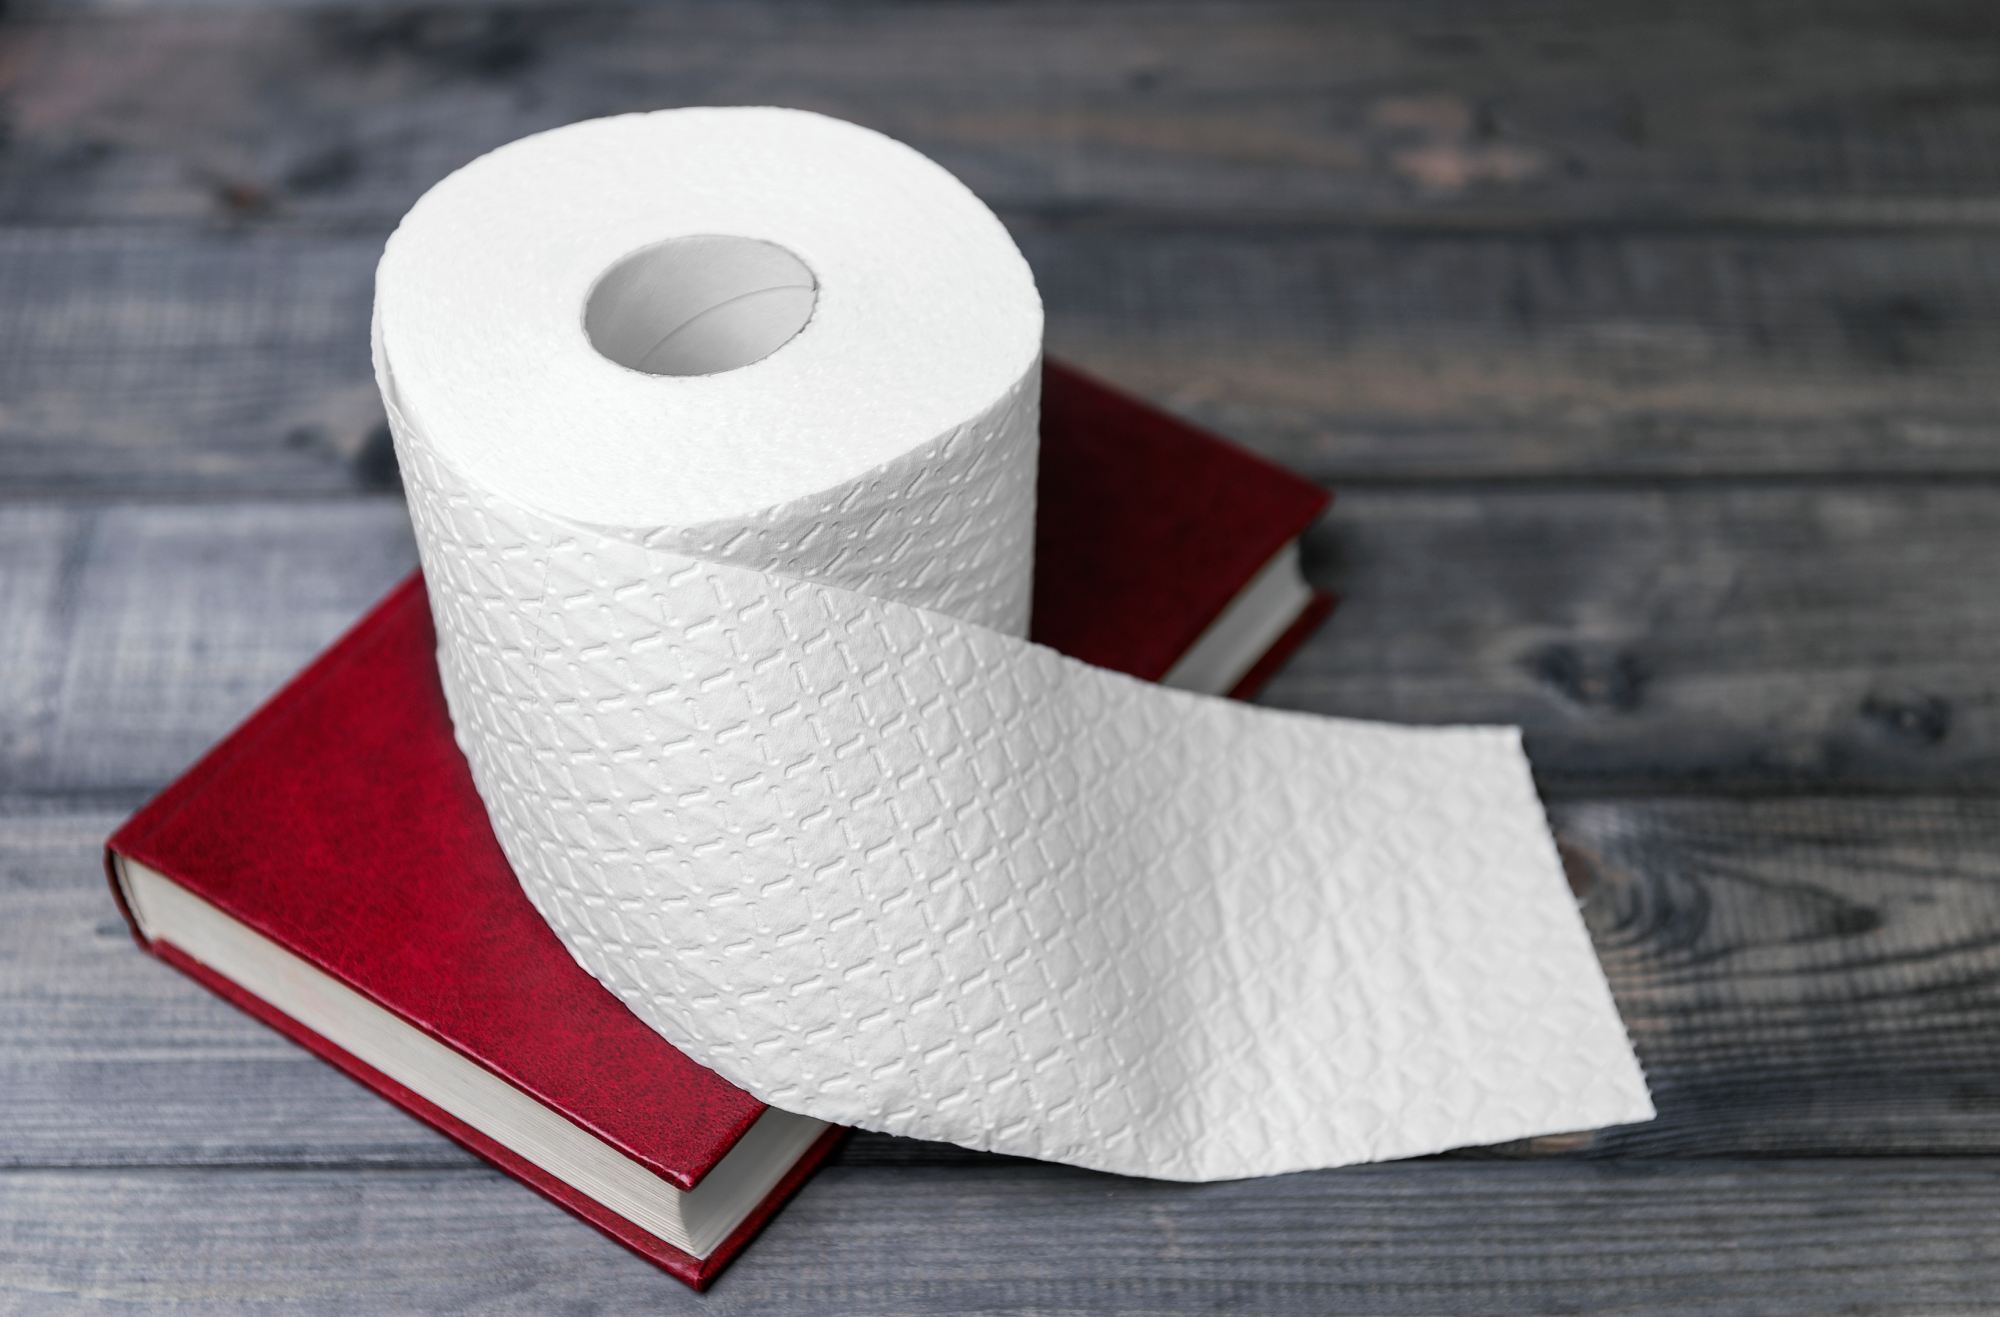 a roll of toilet paper on top of a book